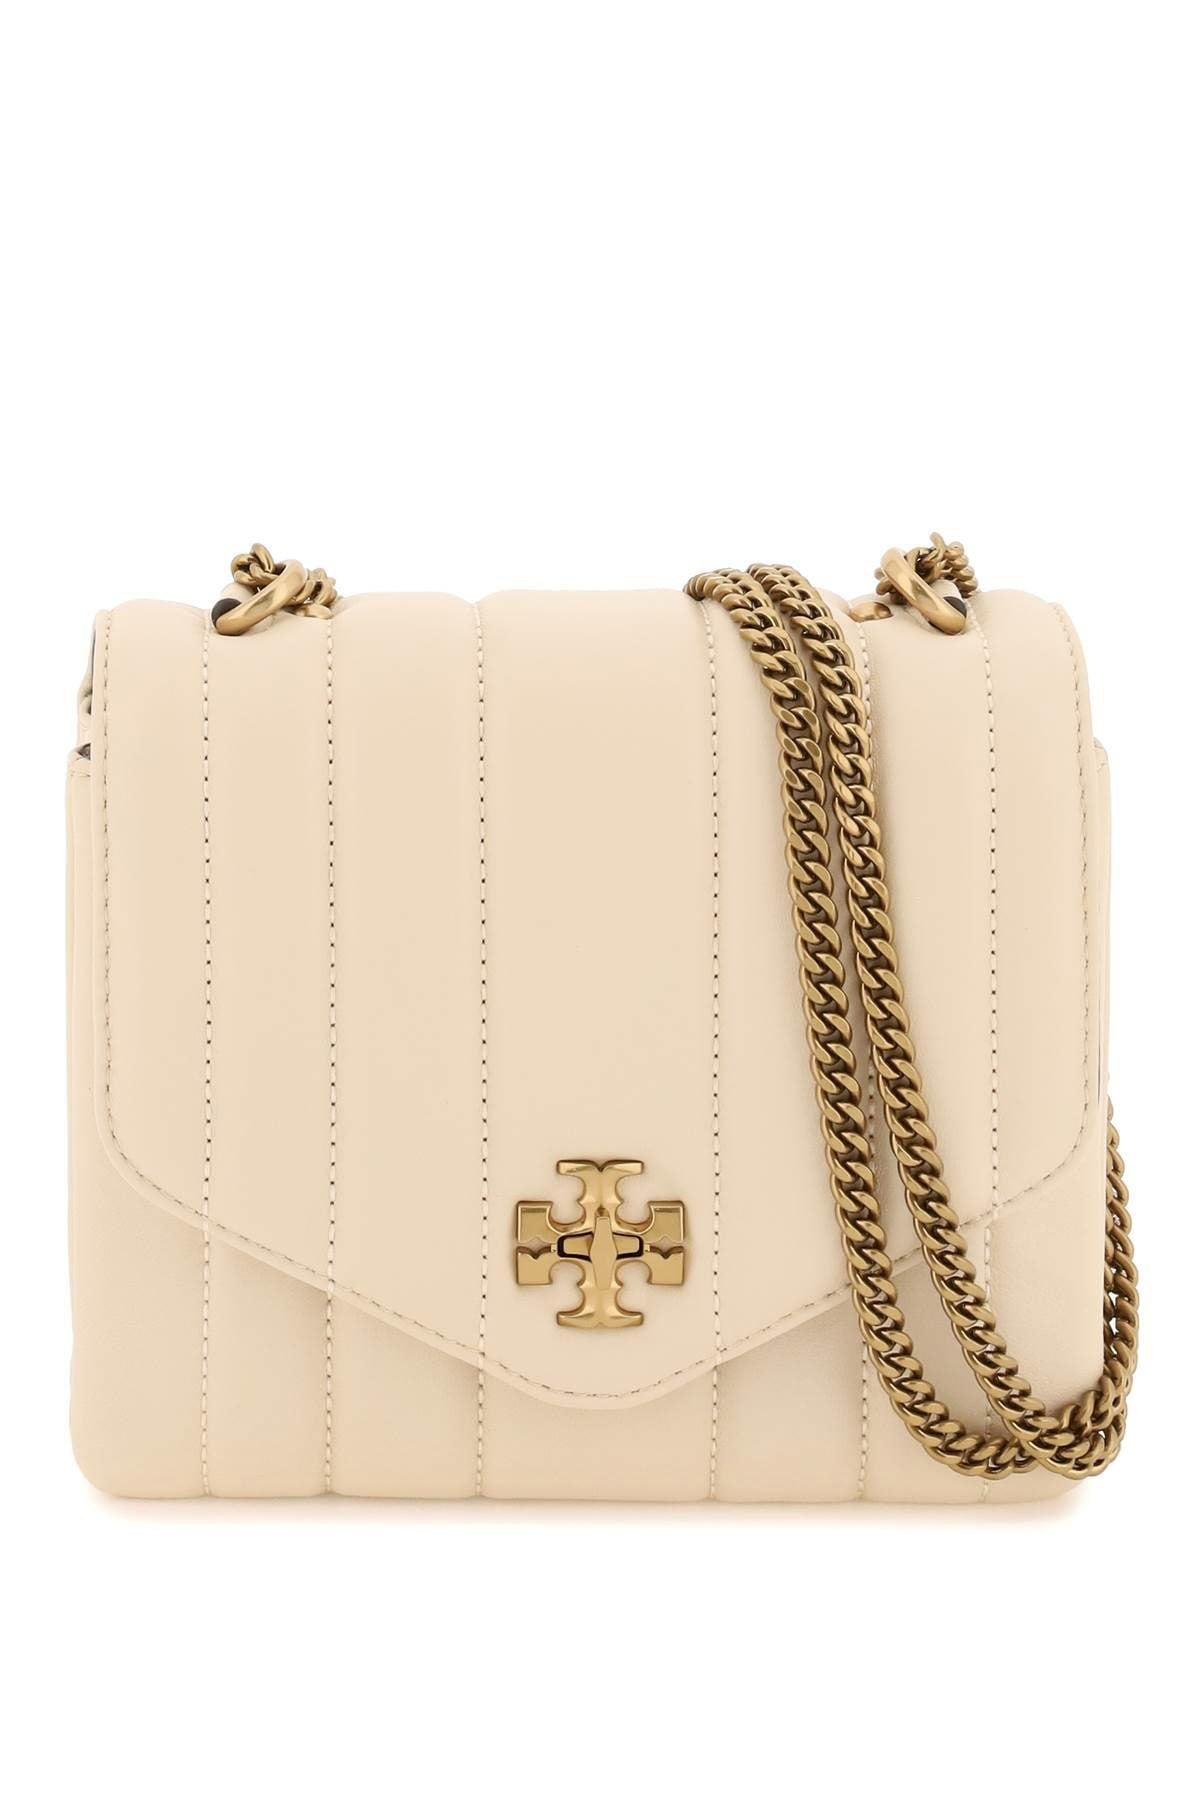 Tory Burch 'kira Squared' Crossbody Bag Beige Leather in Natural | Lyst